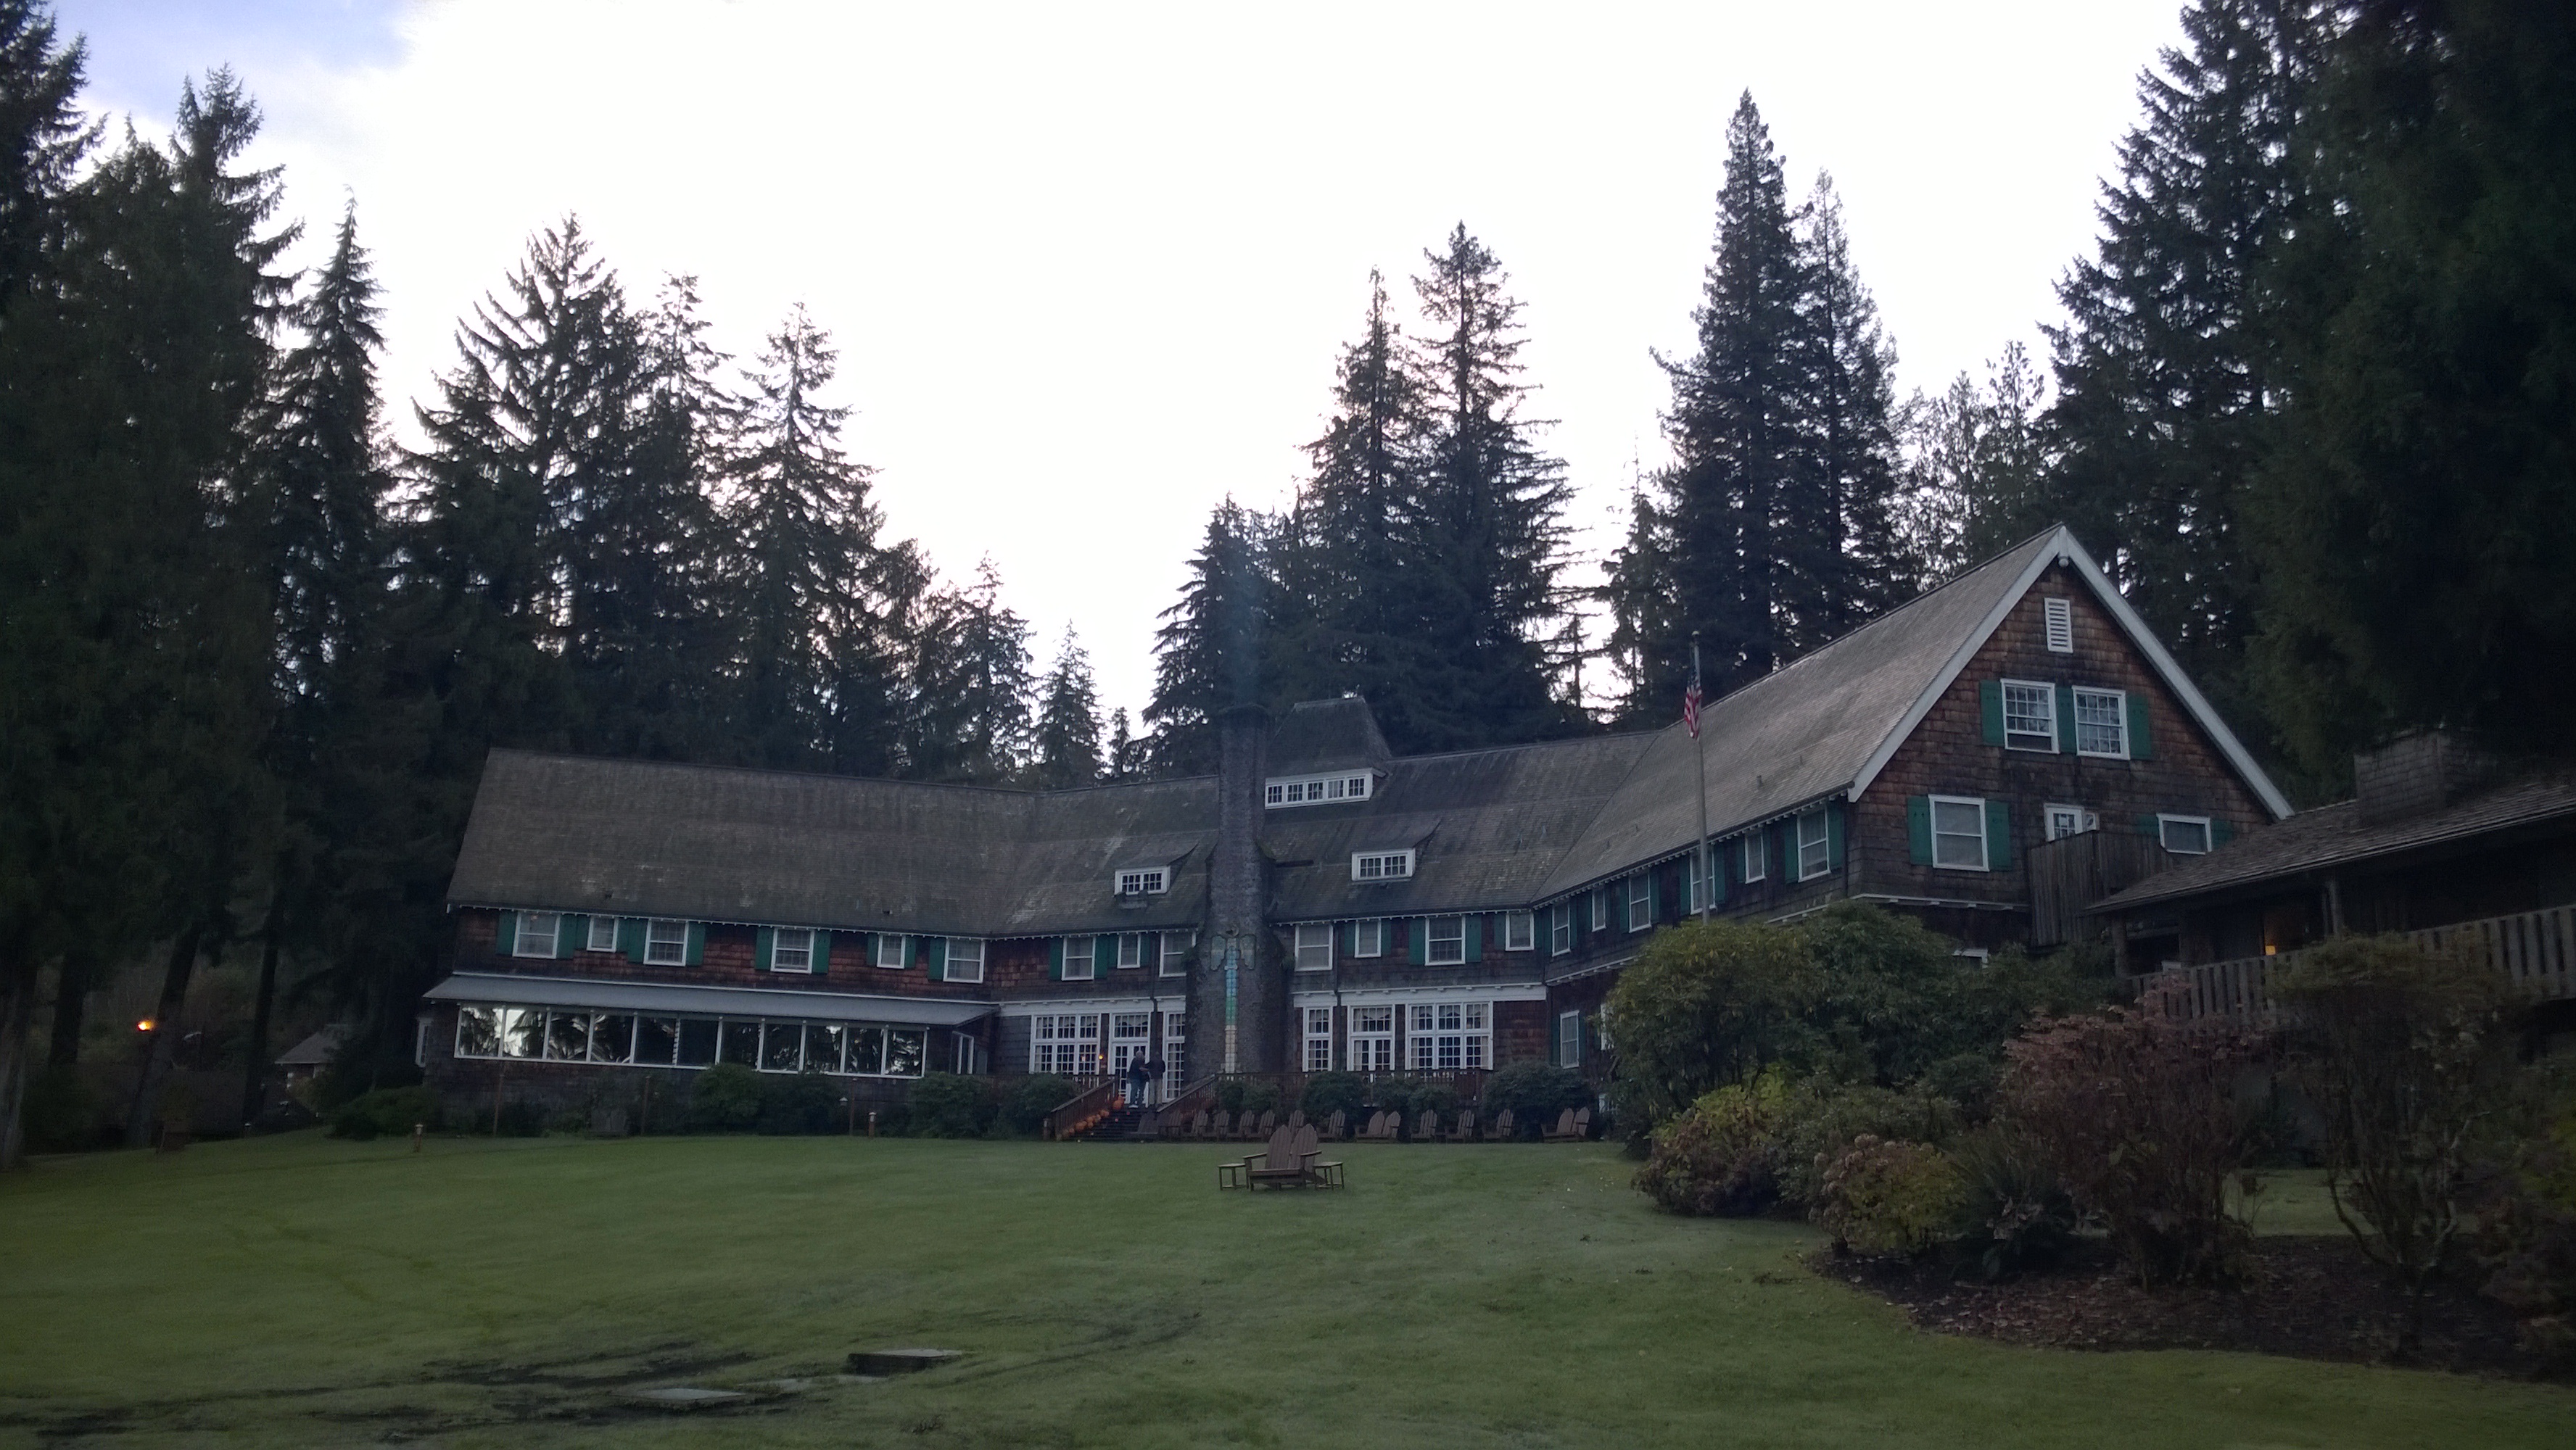 A memorable meal at the Lake Quinault Lodge